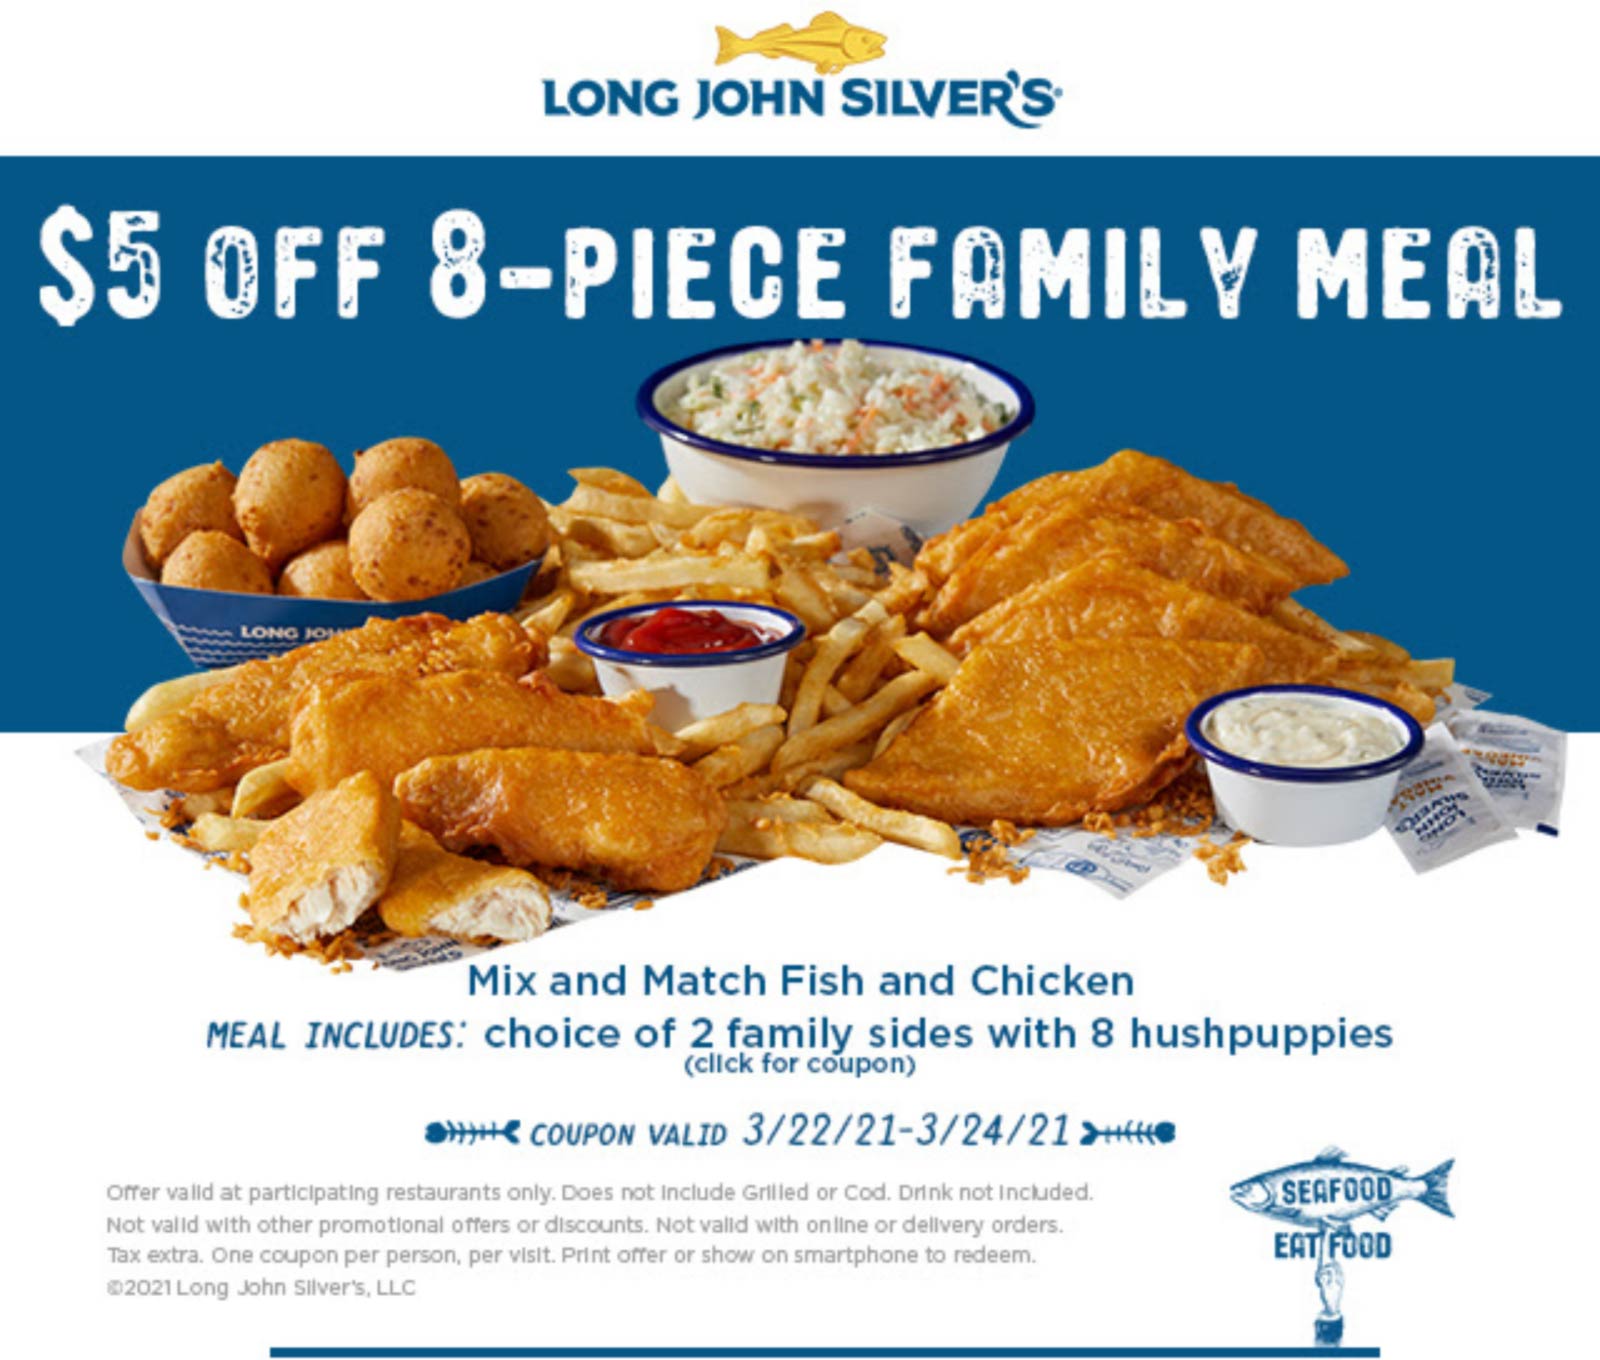 $5 off 8pc meal at Long John Silvers restaurants #longjohnsilvers The